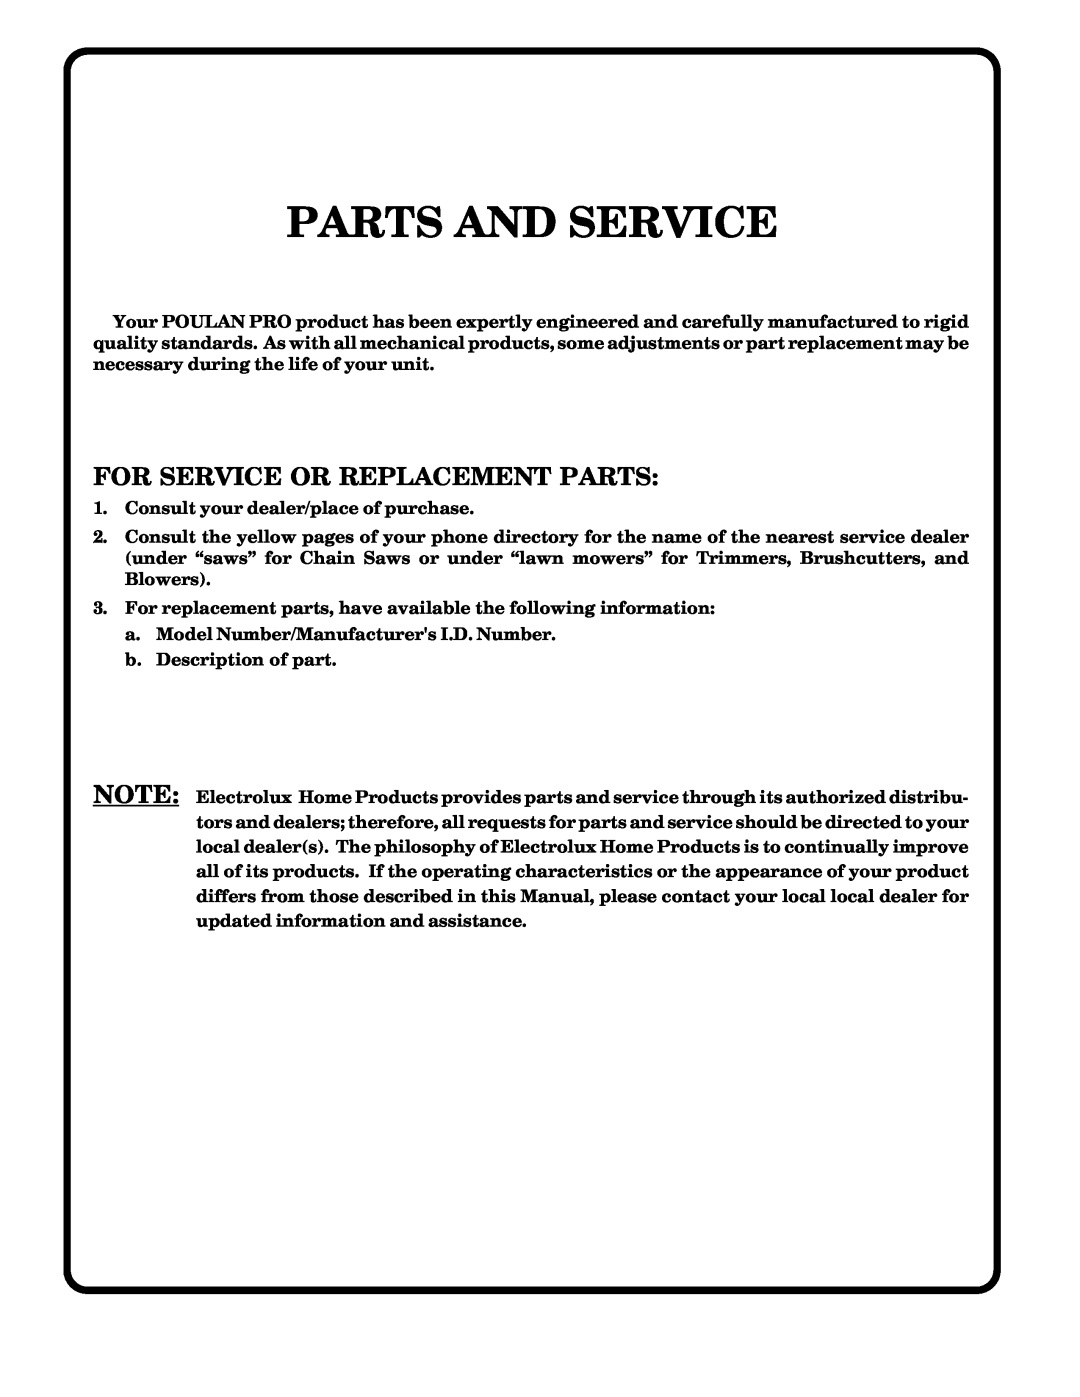 Poulan 178087 owner manual Parts And Service, For Service Or Replacement Parts 